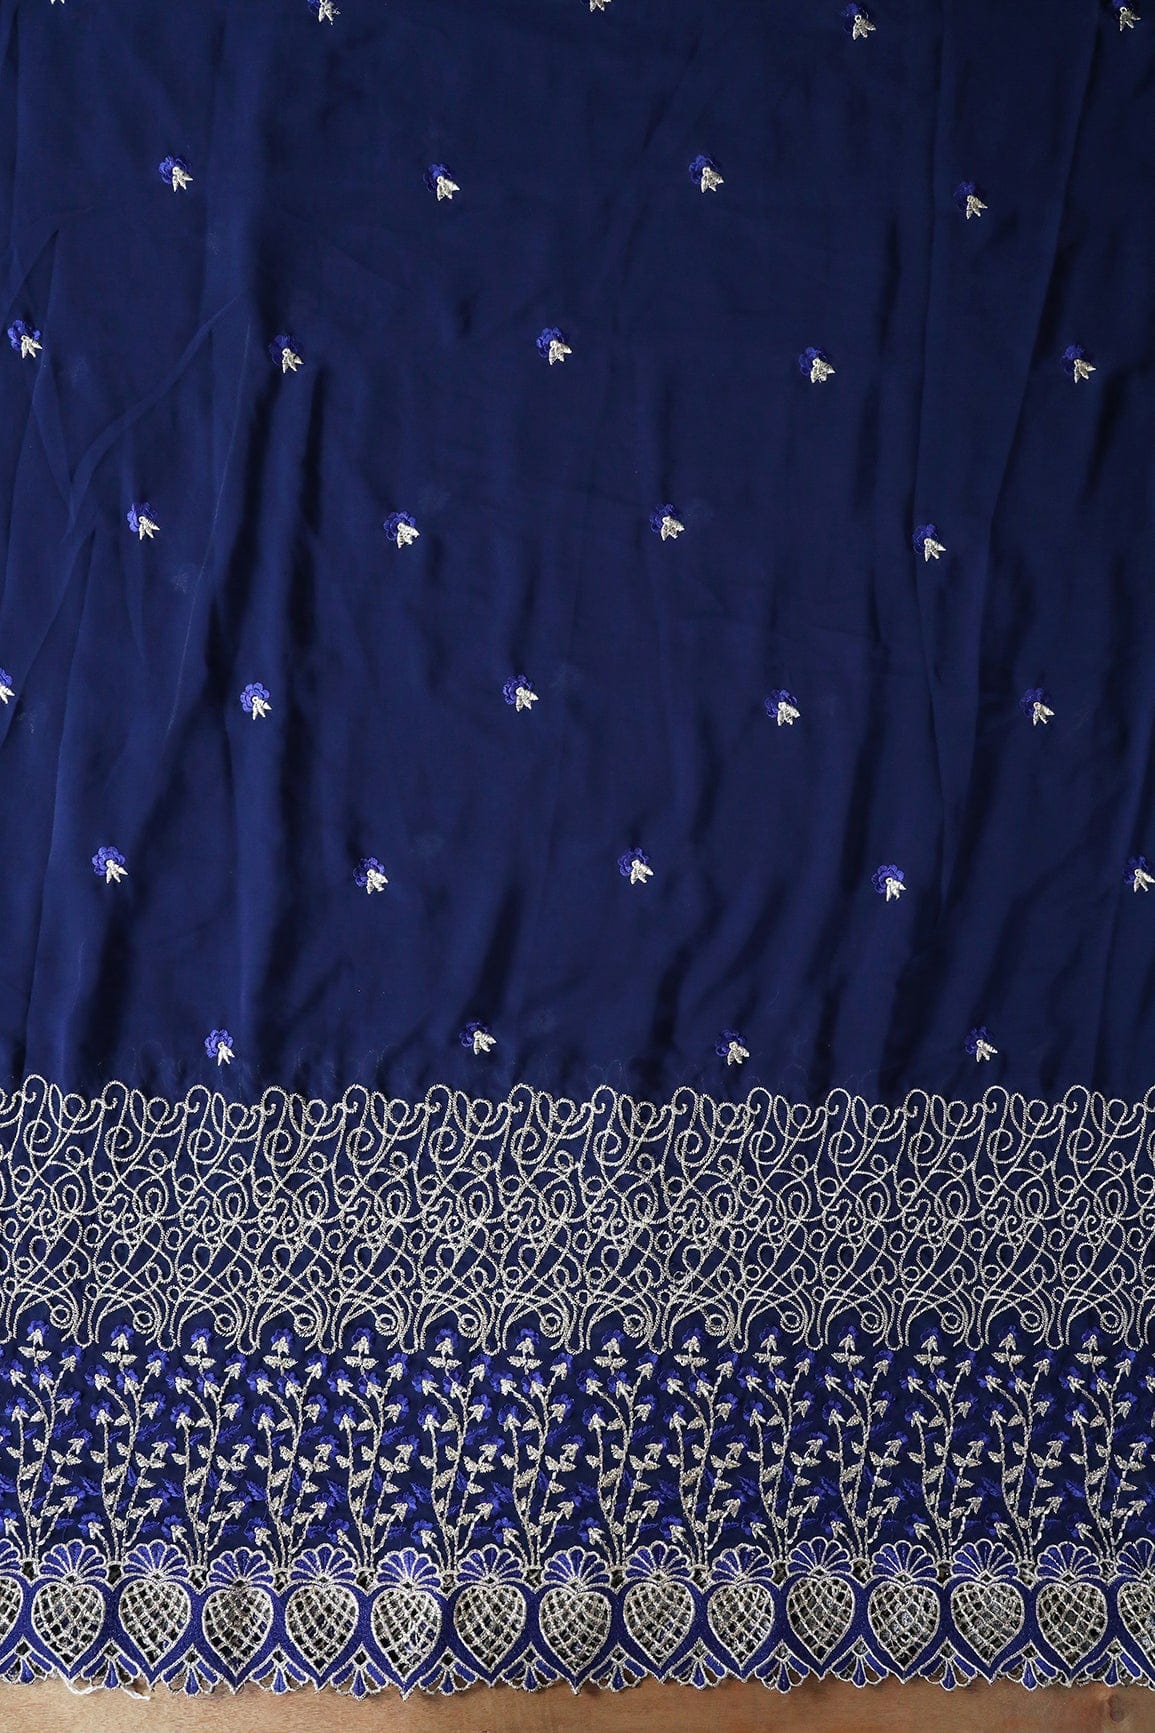 doeraa Embroidery Fabrics Big Width''56'' Blue Thread With Zari Floral Embroidery Work On Navy Blue Georgette Fabric With Border